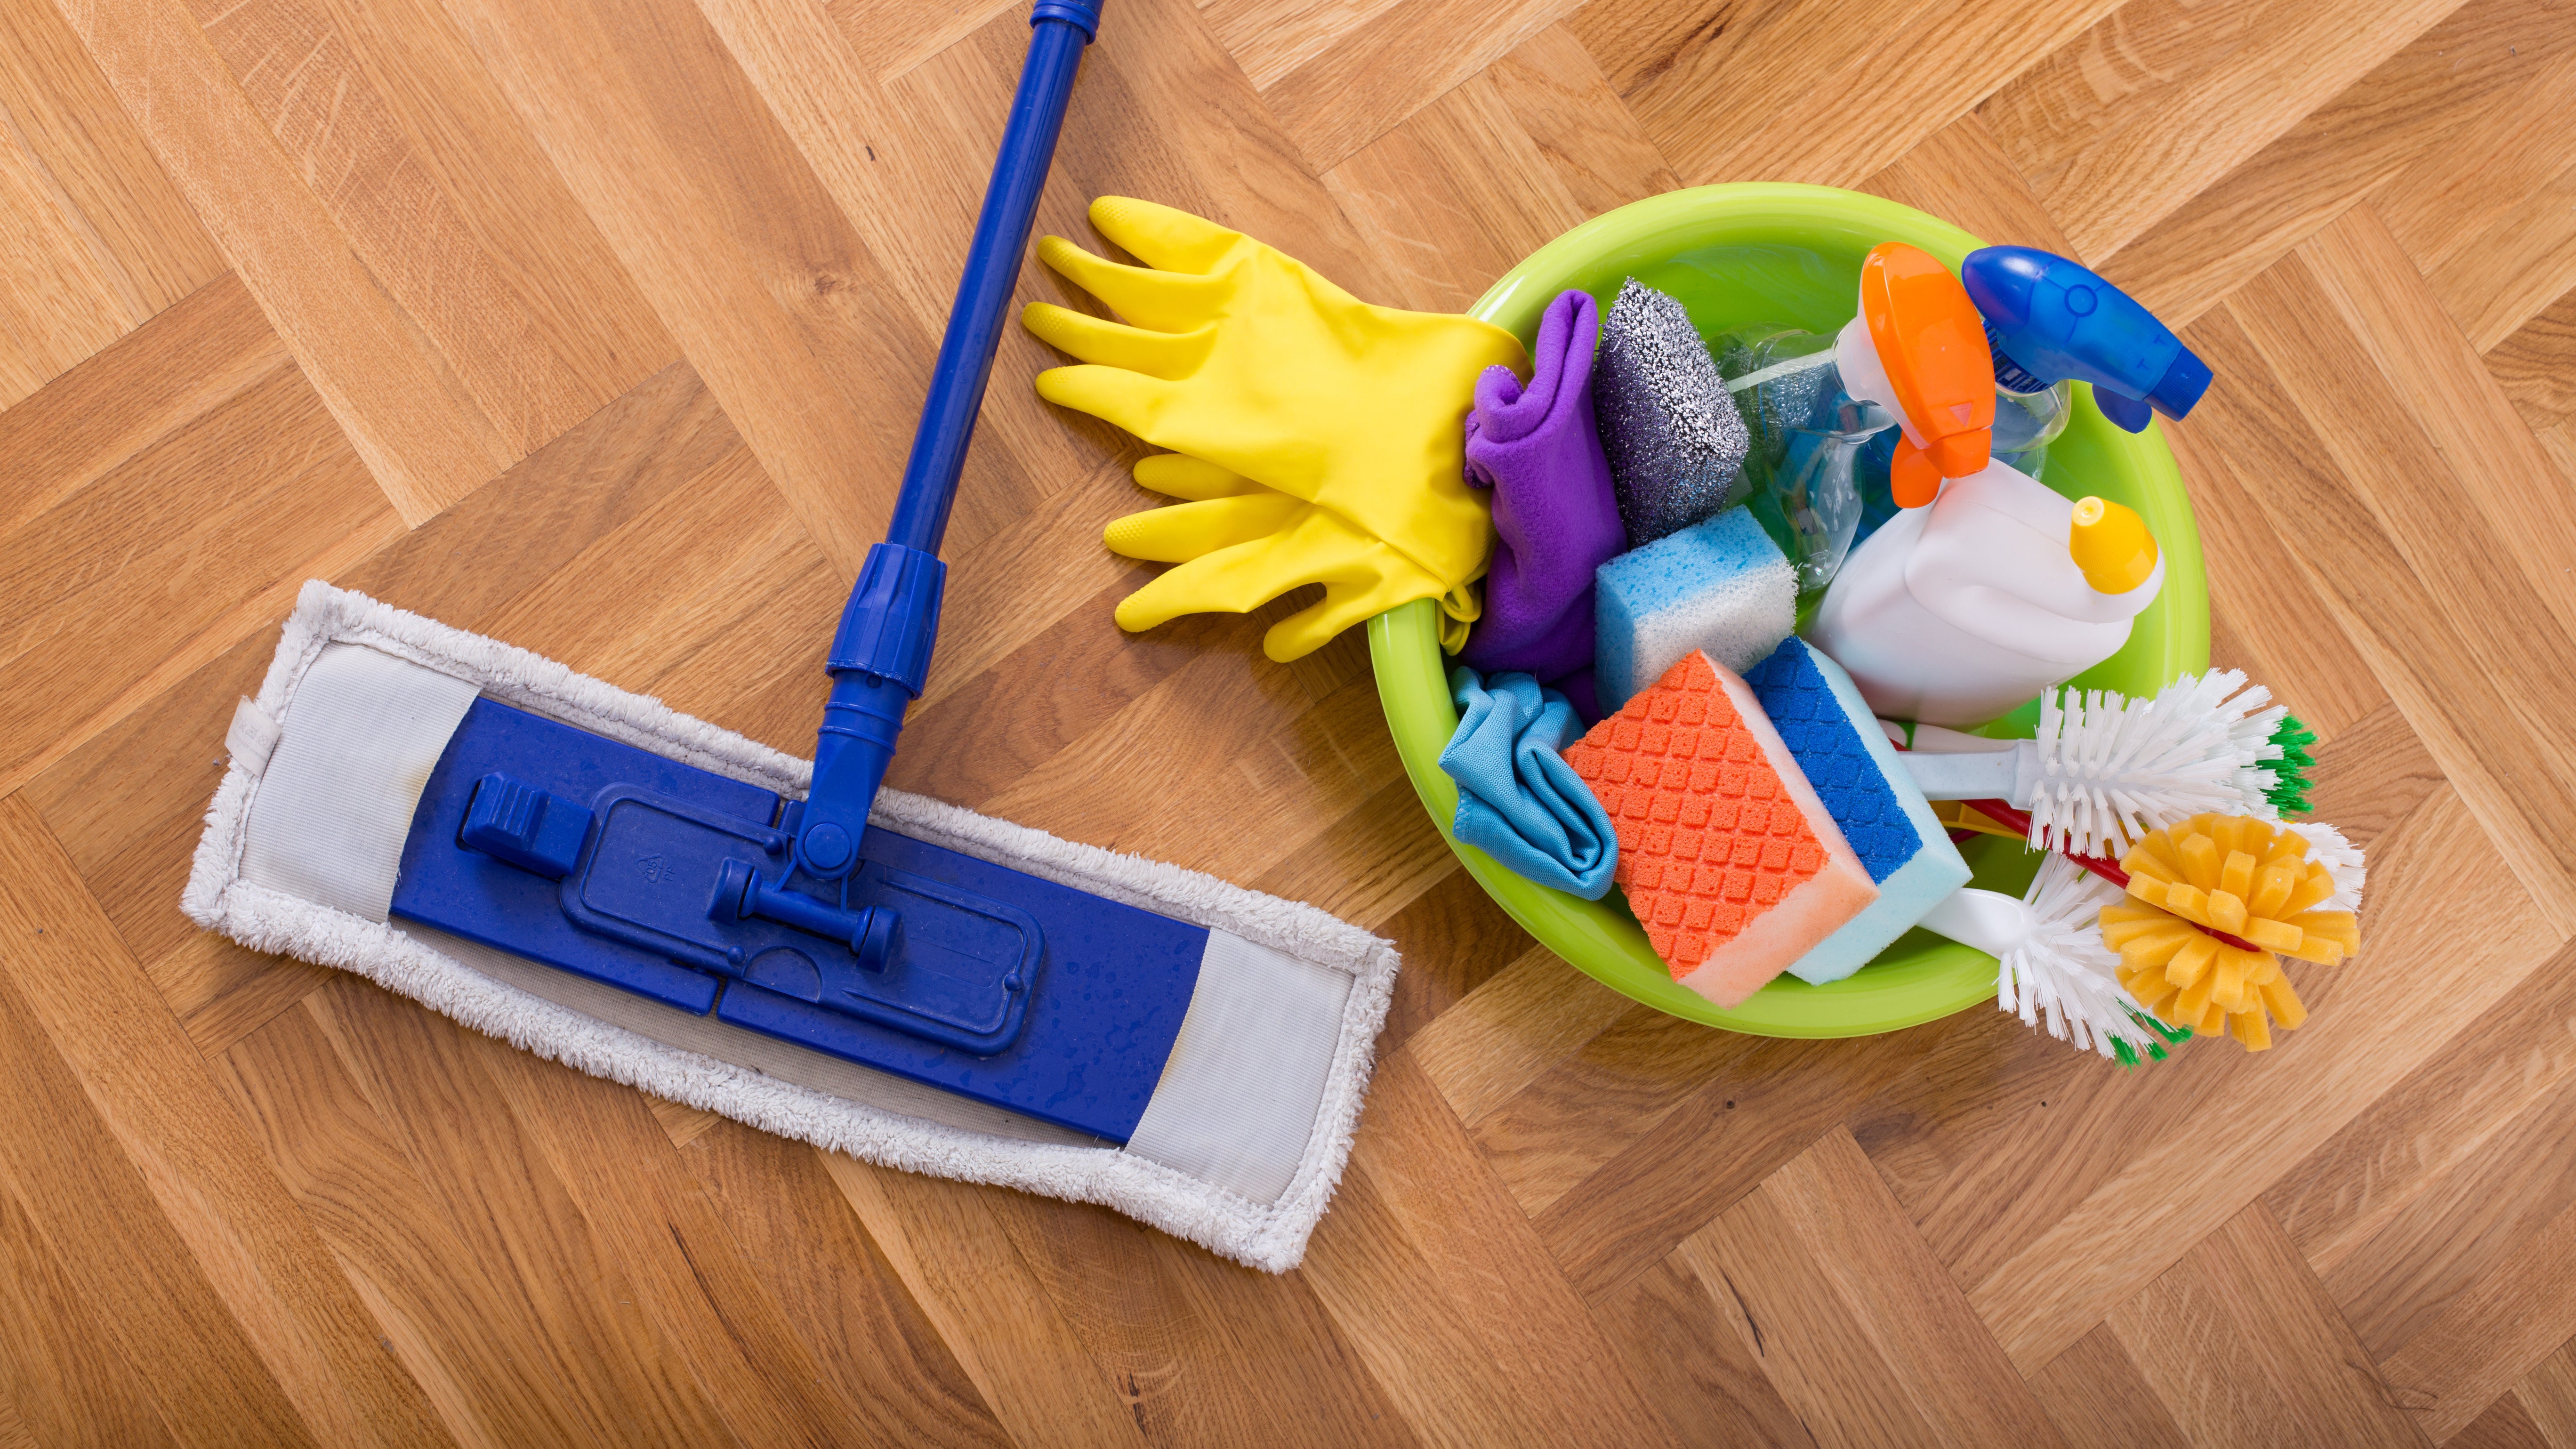 How To Clean All Types Of Flooring